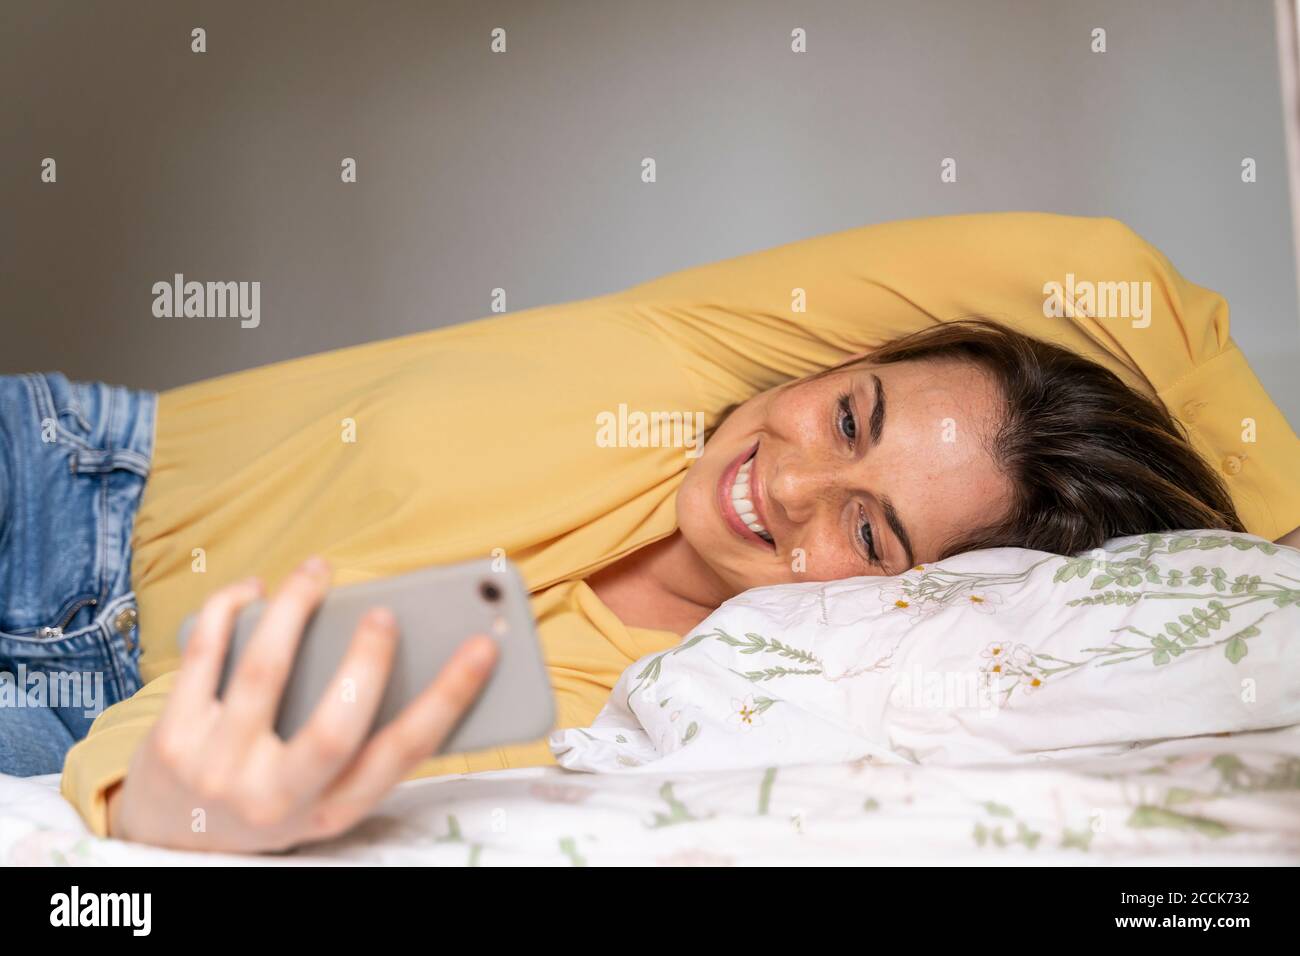 Smiling woman using phone while lying in bedroom Stock Photo